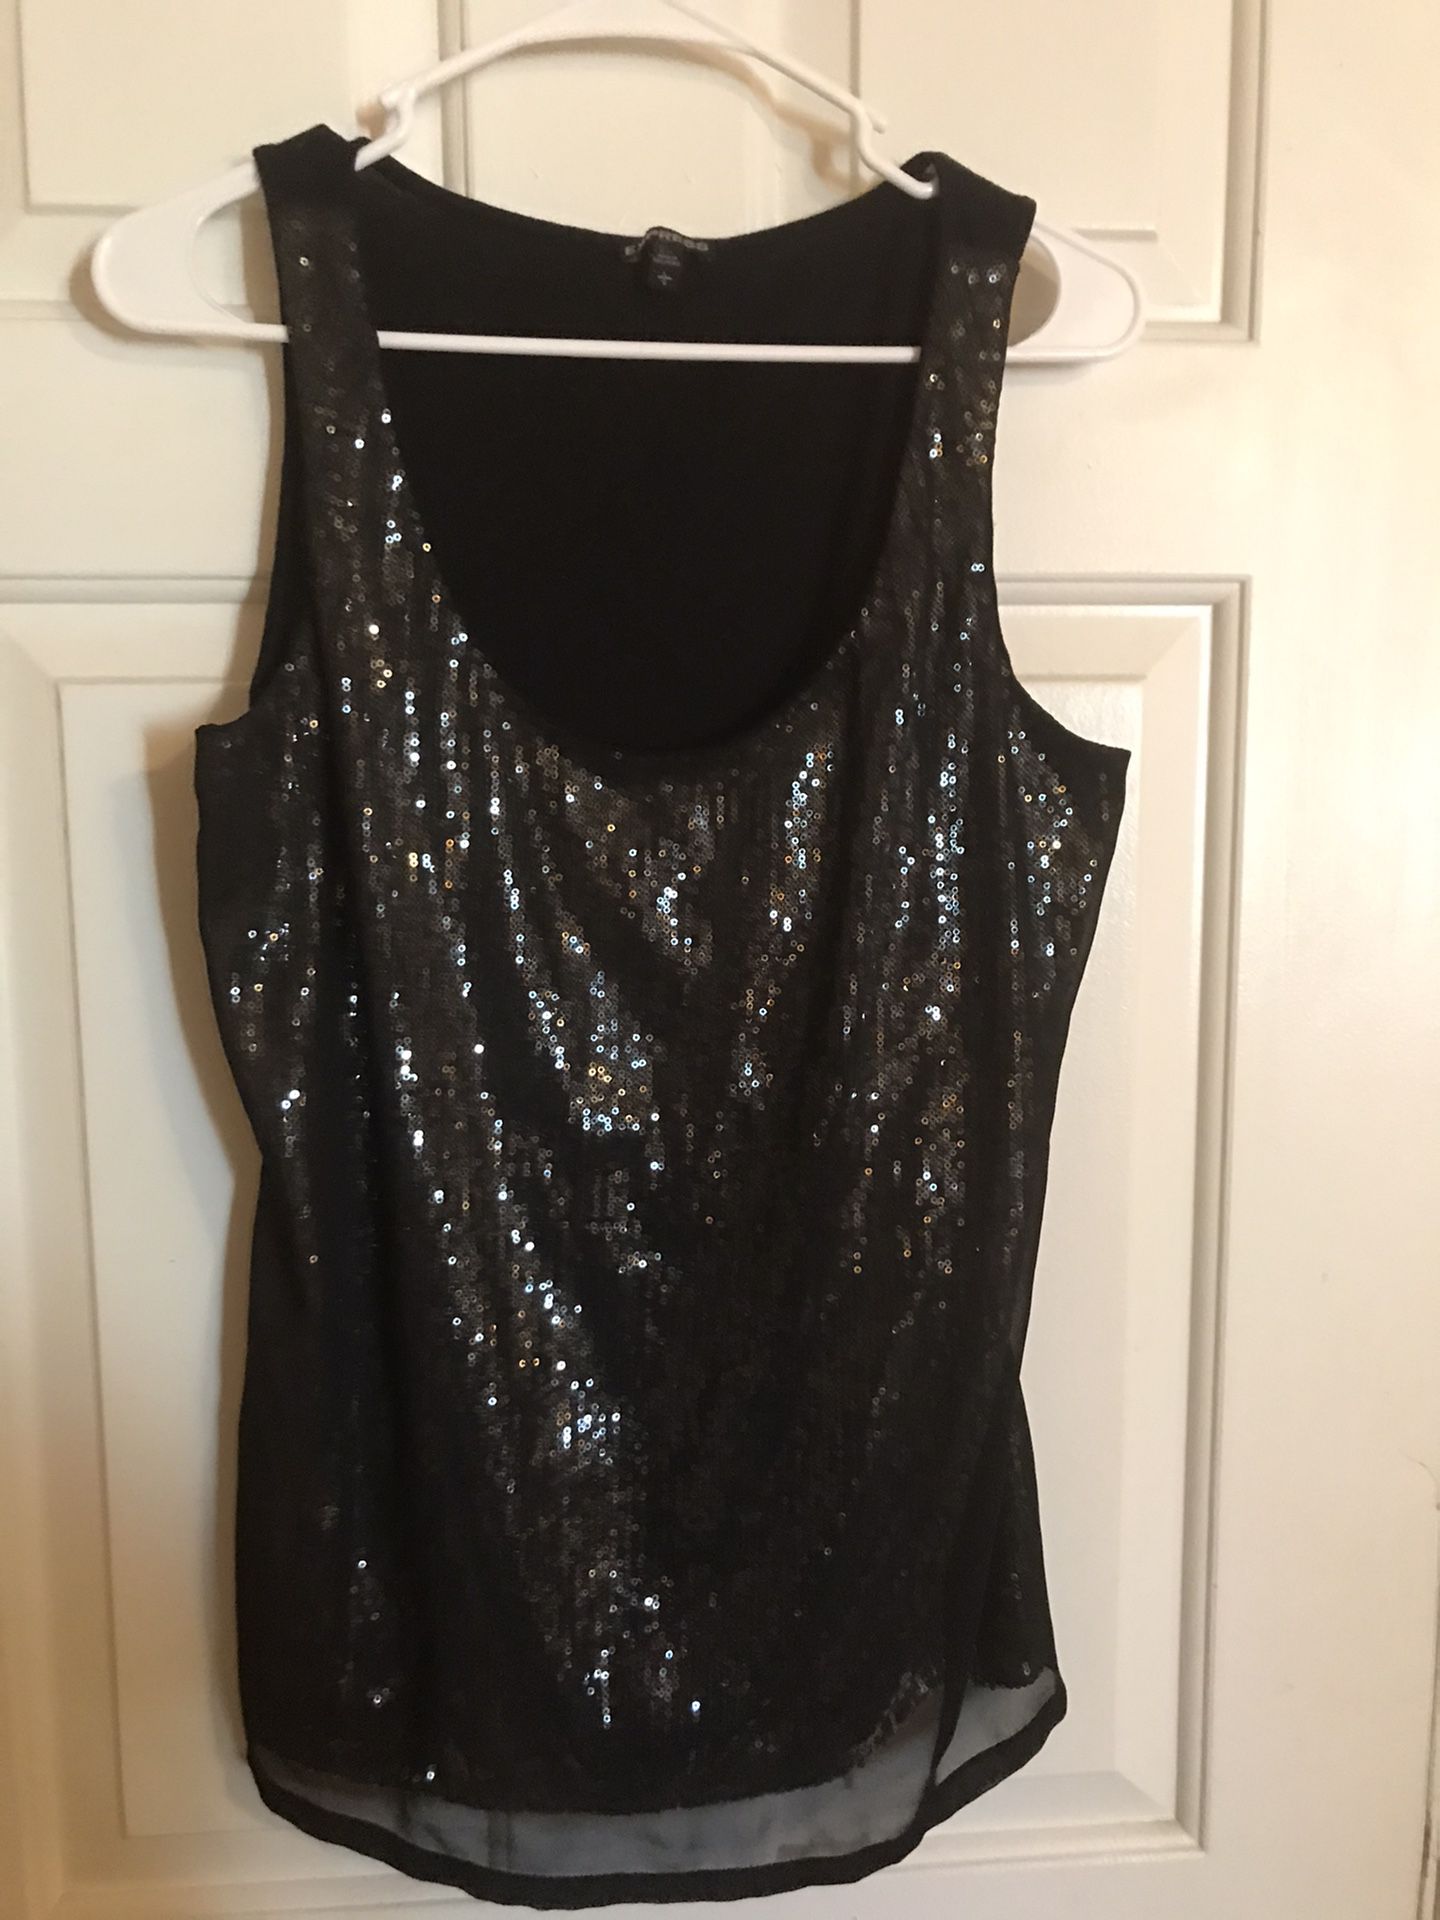 Express sleeveless black/silver sequined top